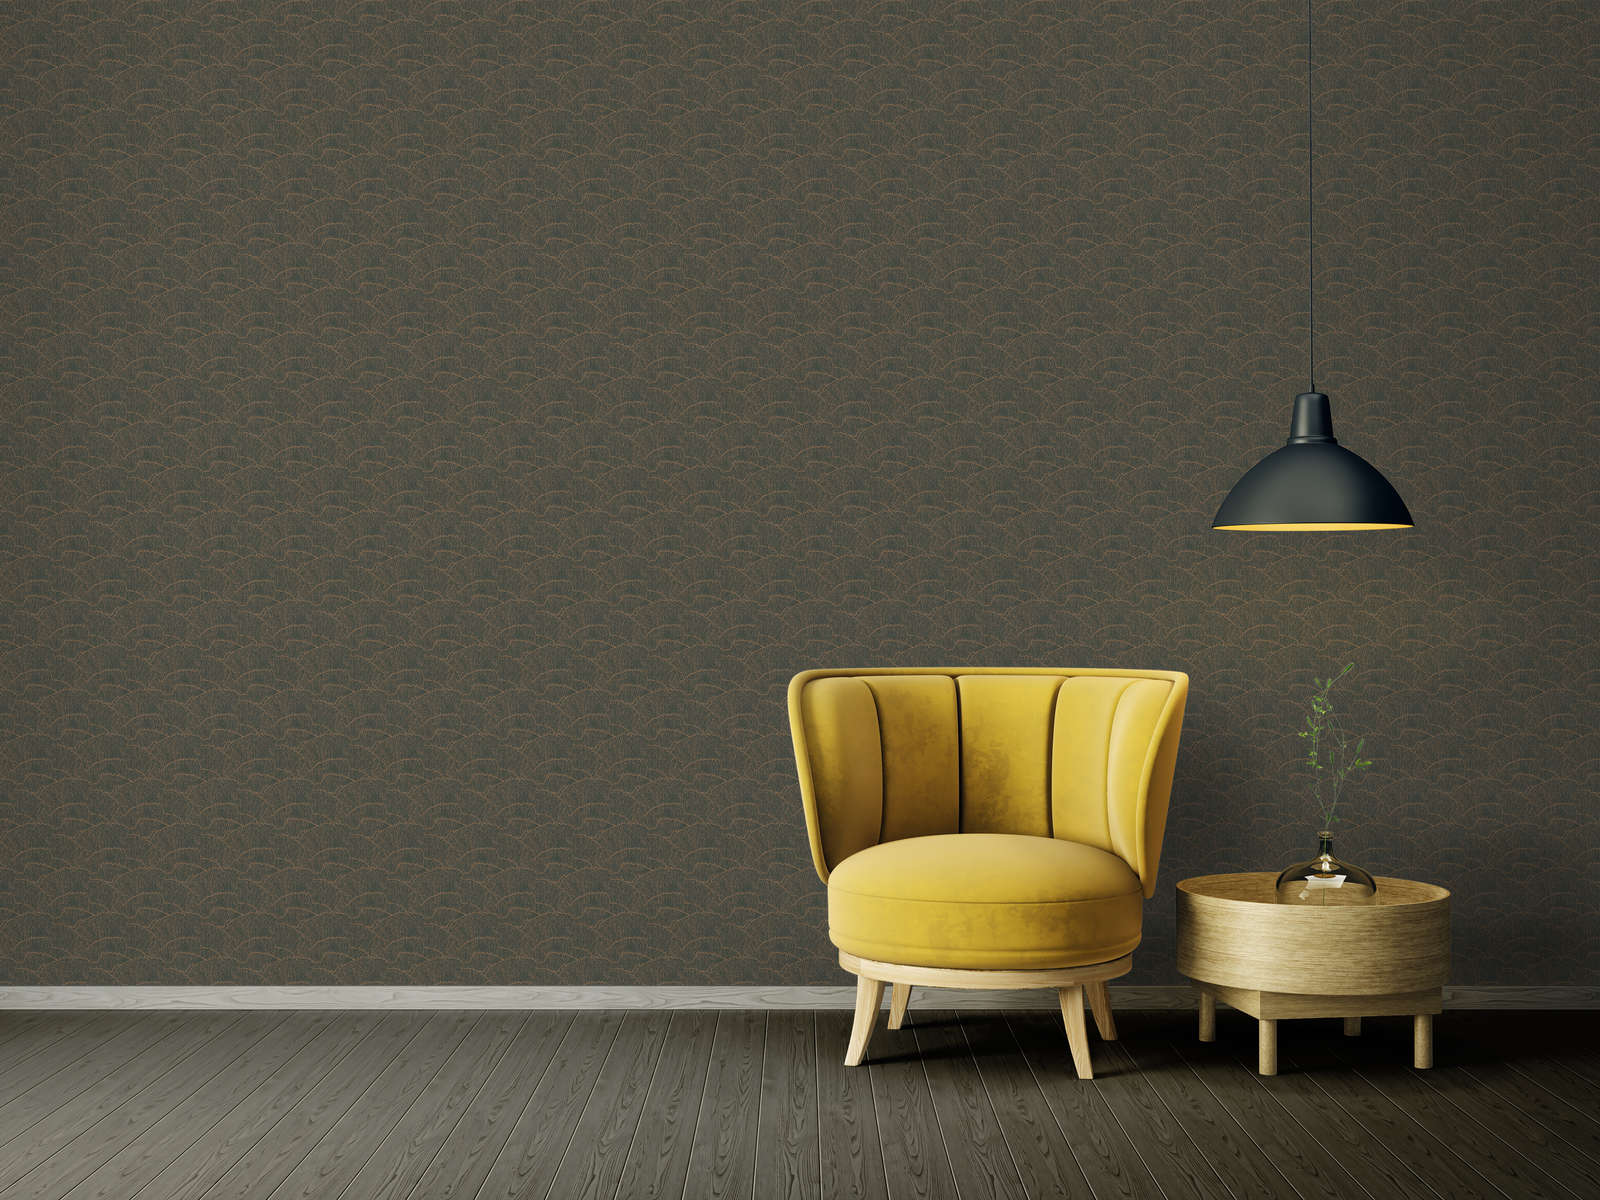             Non-woven wallpaper with abstract pattern - gold, green, metallic
        